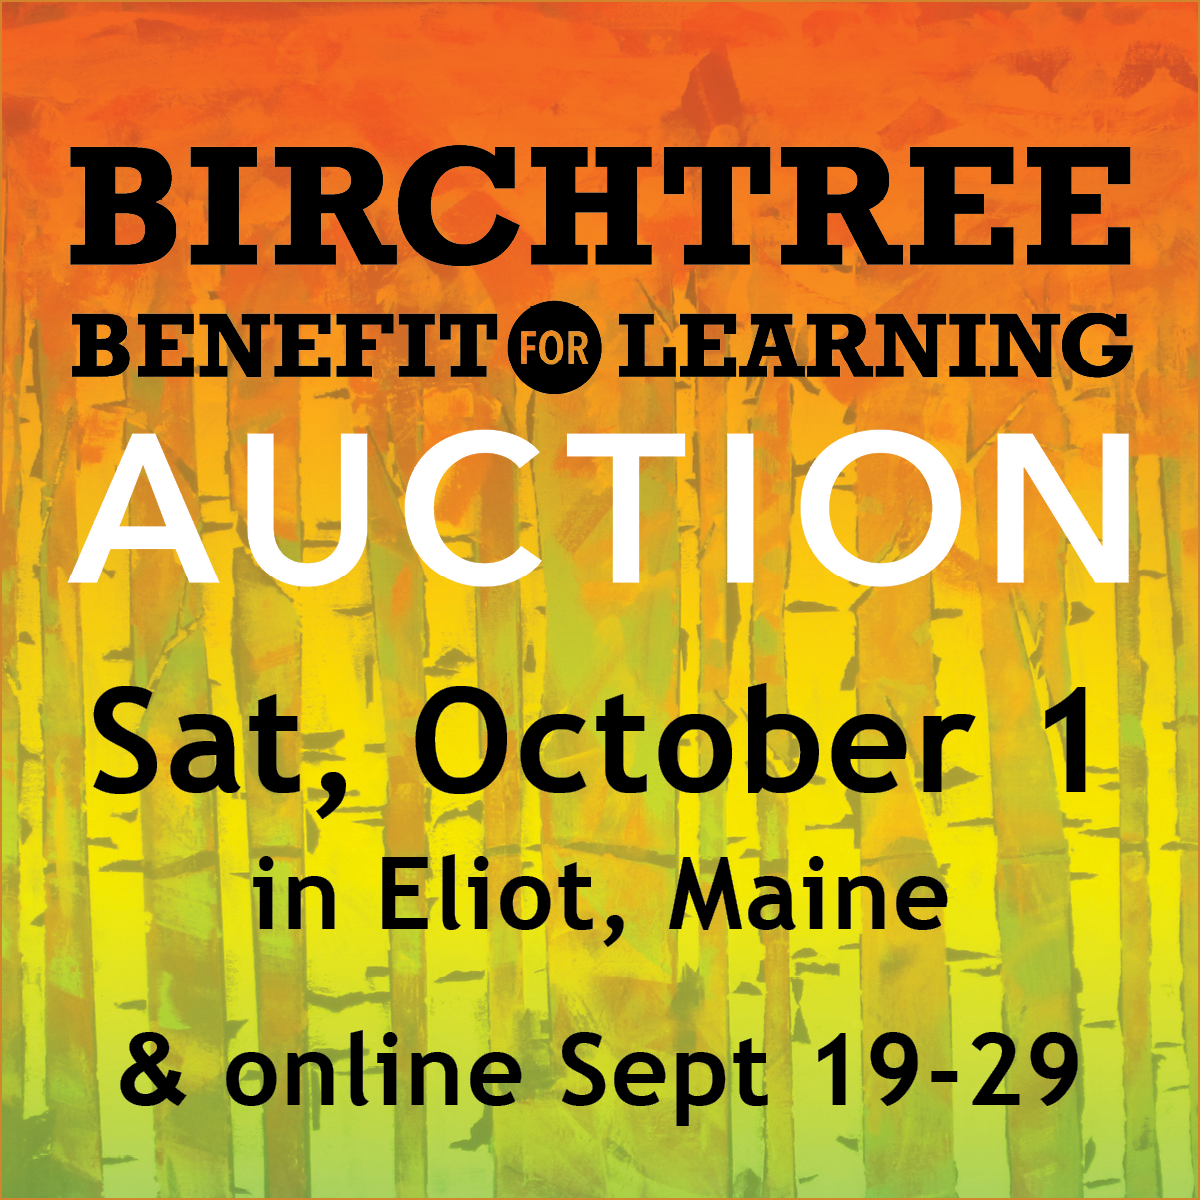 Benefit for Learning Auction